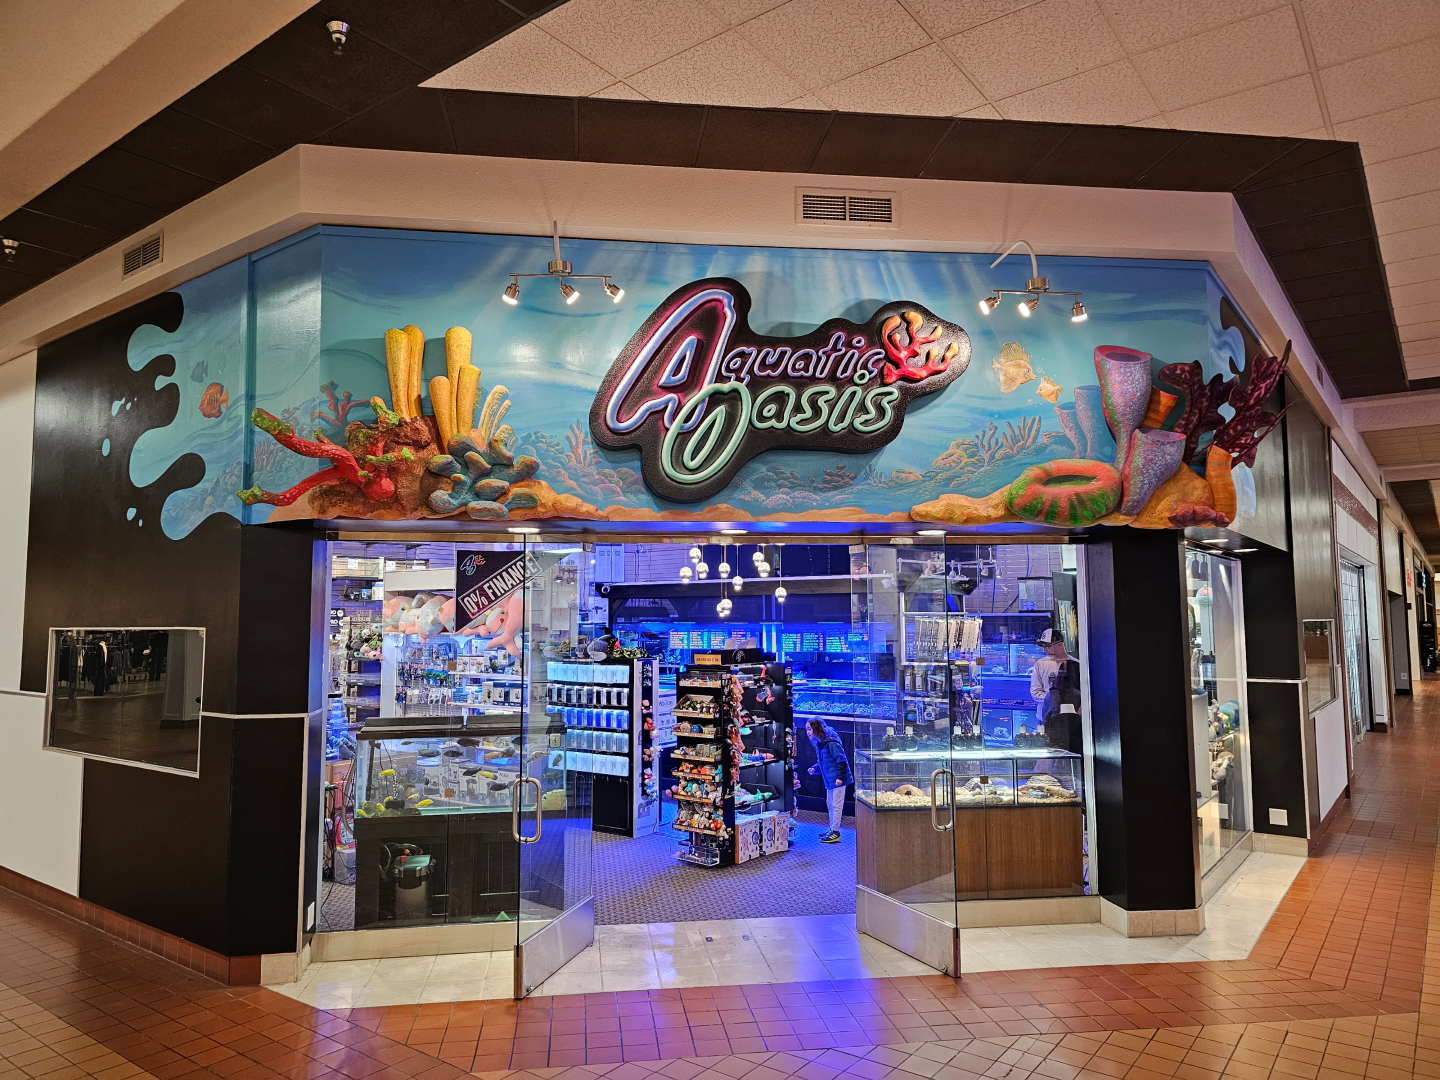 A store in a mall called aquatic oases